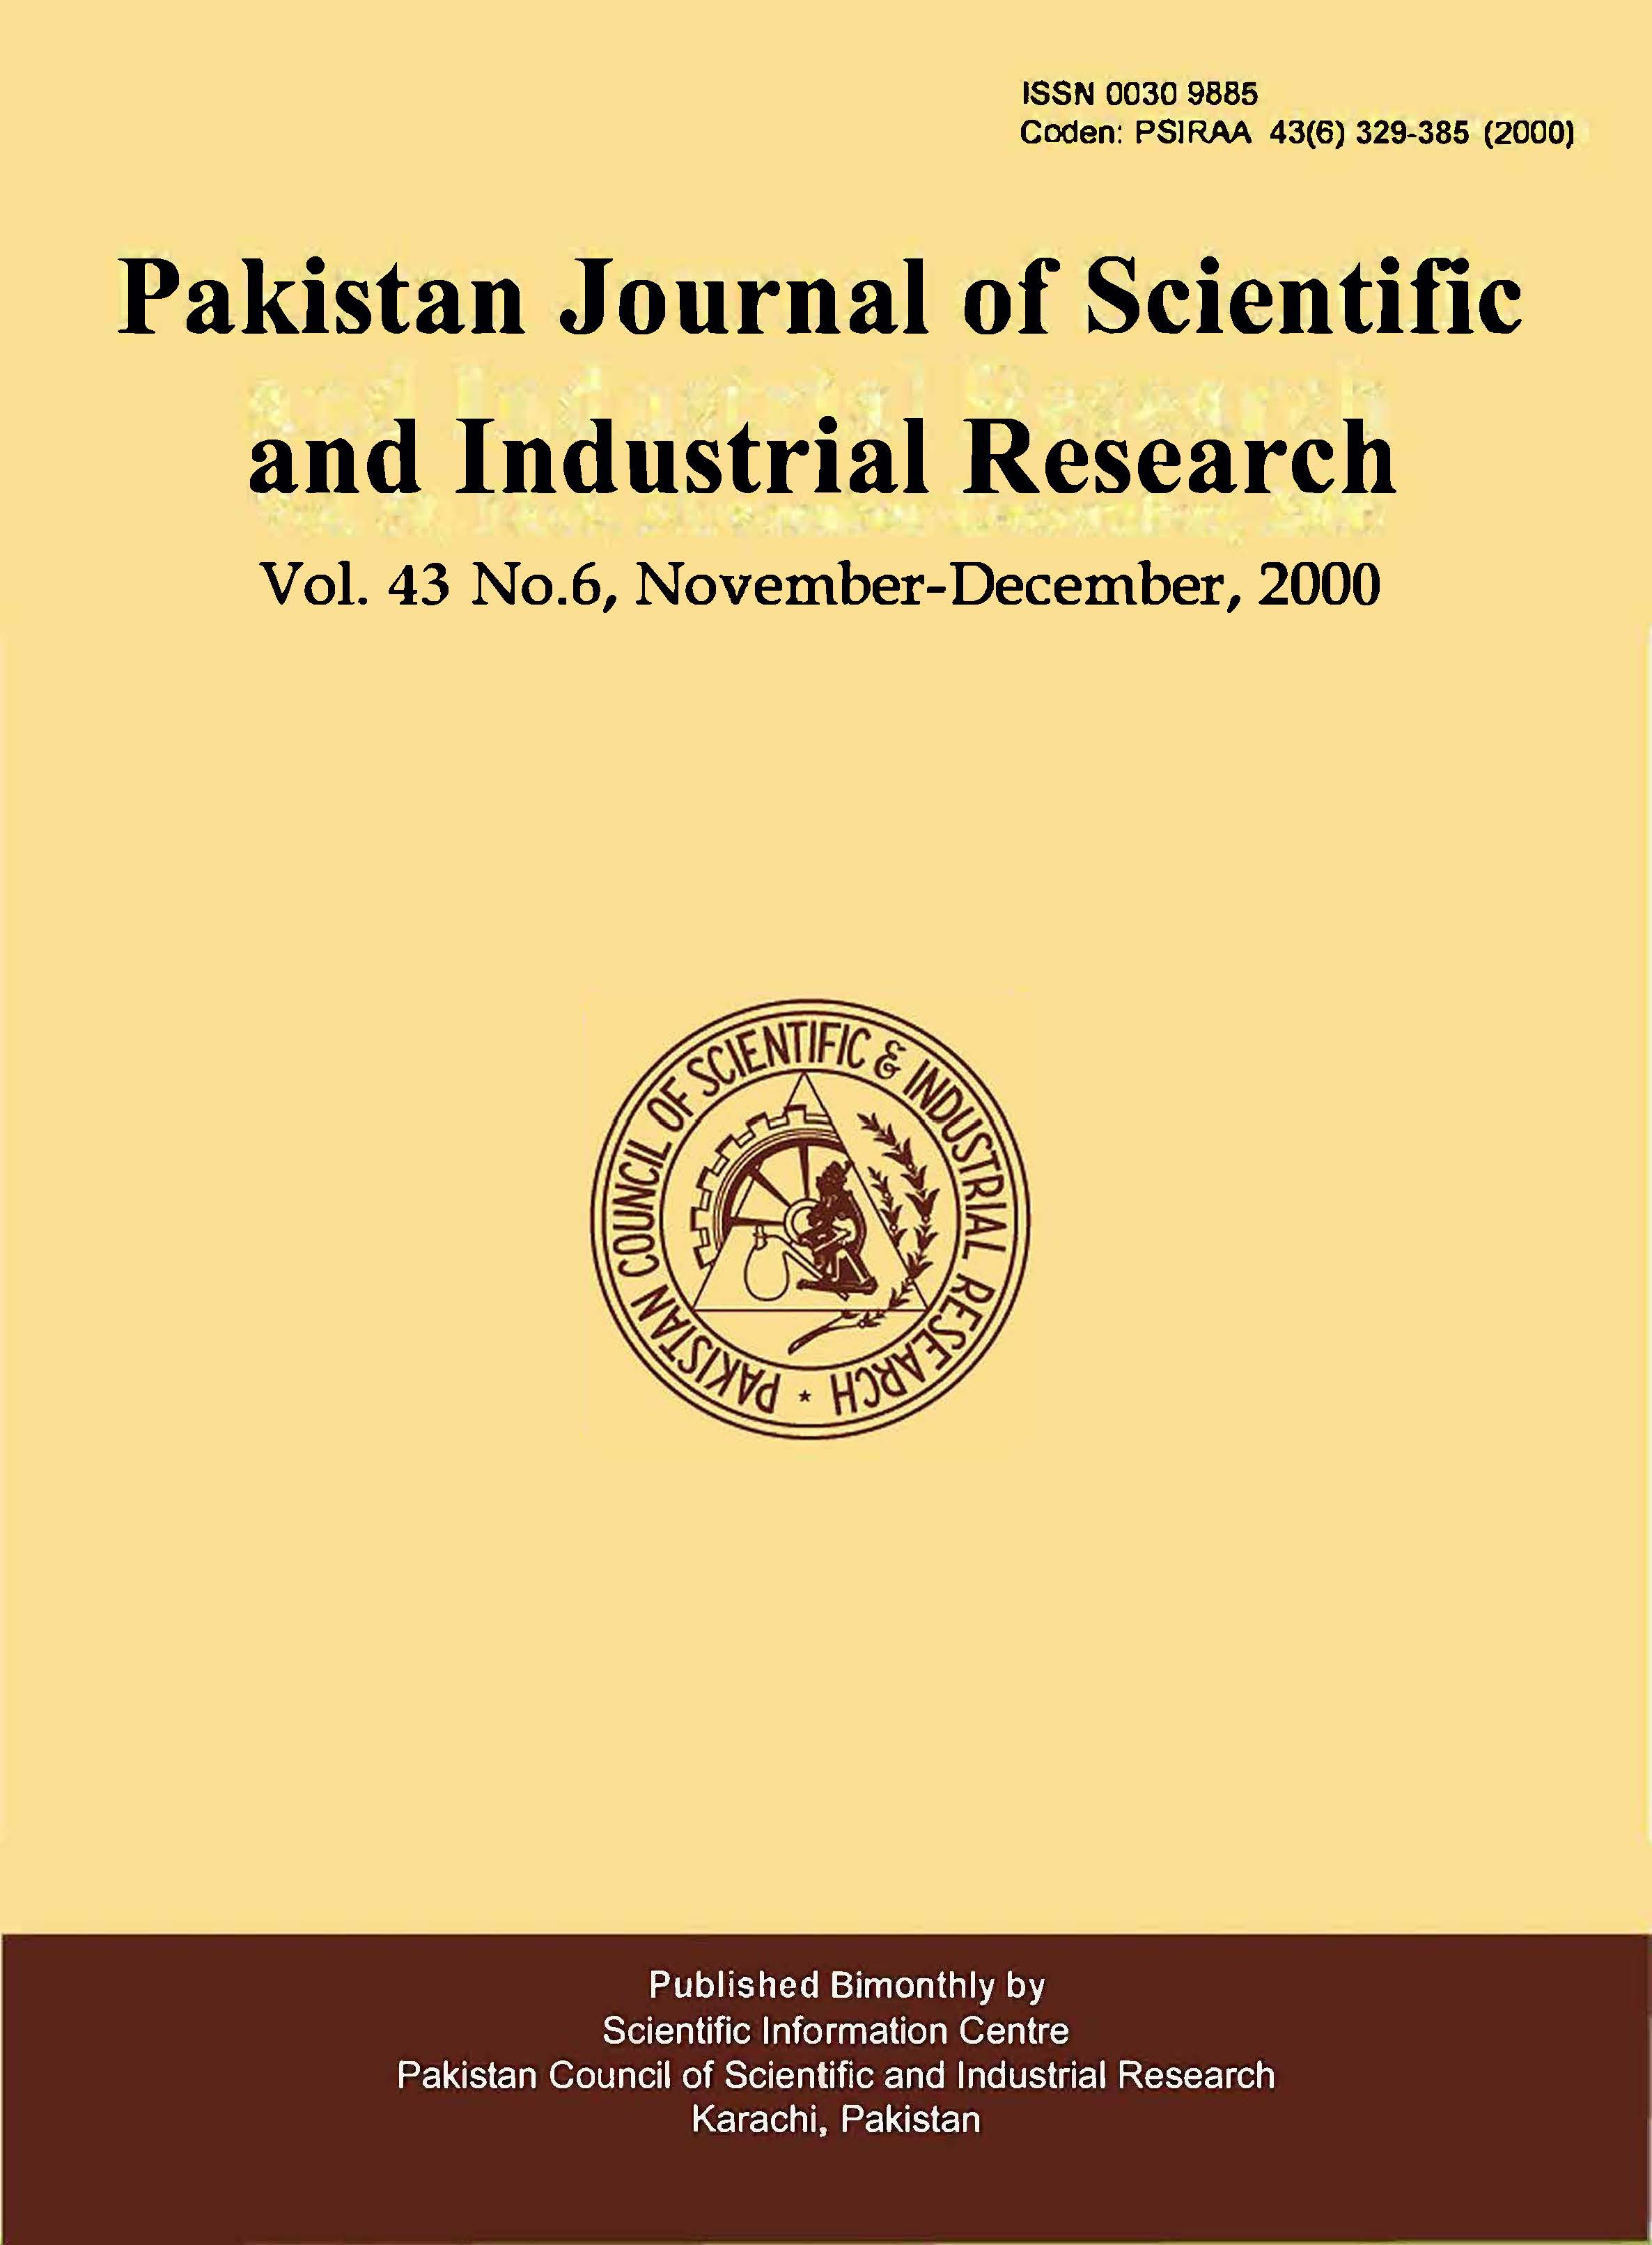 					View Vol. 43 No. 6 (2000): Pakistan Journal of Scientific and Industrial Research
				